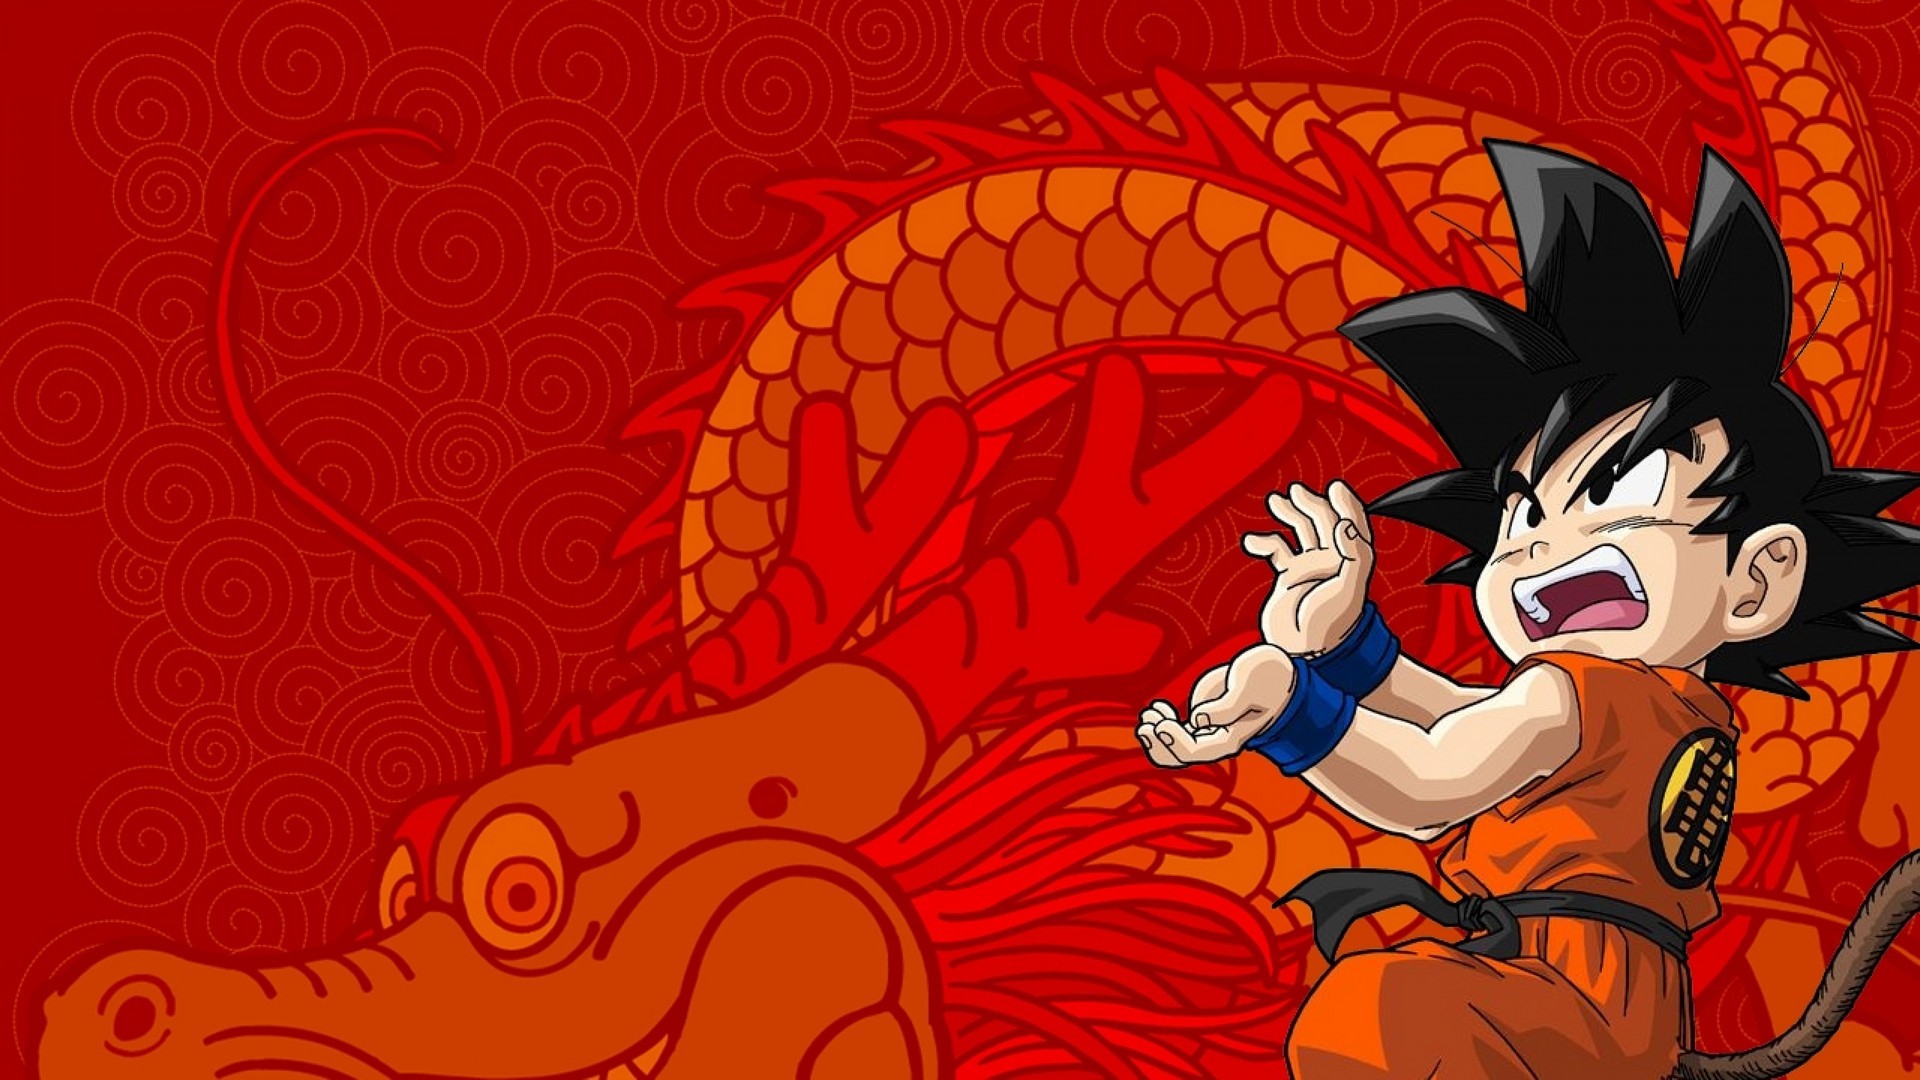 Wallpapers Kid Goku with resolution 1920X1080 pixel. You can use this wallpaper as background for your desktop Computer Screensavers, Android or iPhone smartphones